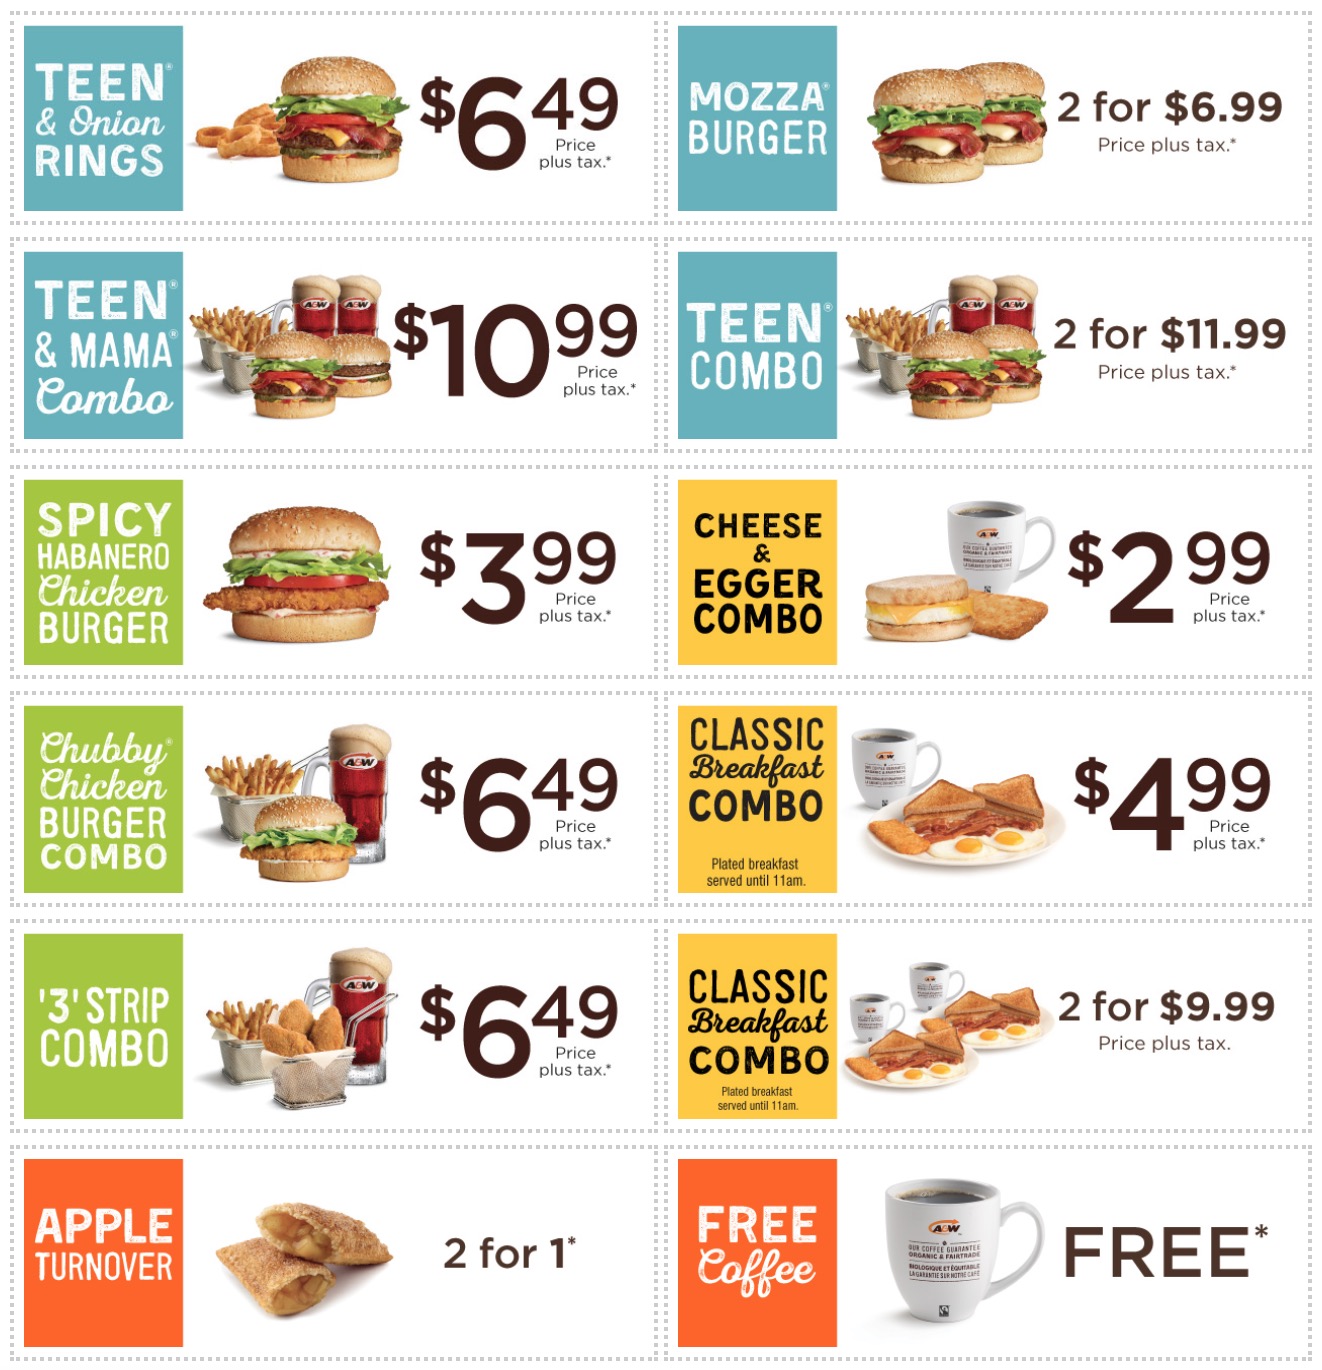 a-w-canada-coupons-free-coffee-bogo-free-apple-turnovers-spicy-habanero-chicken-burger-for-3